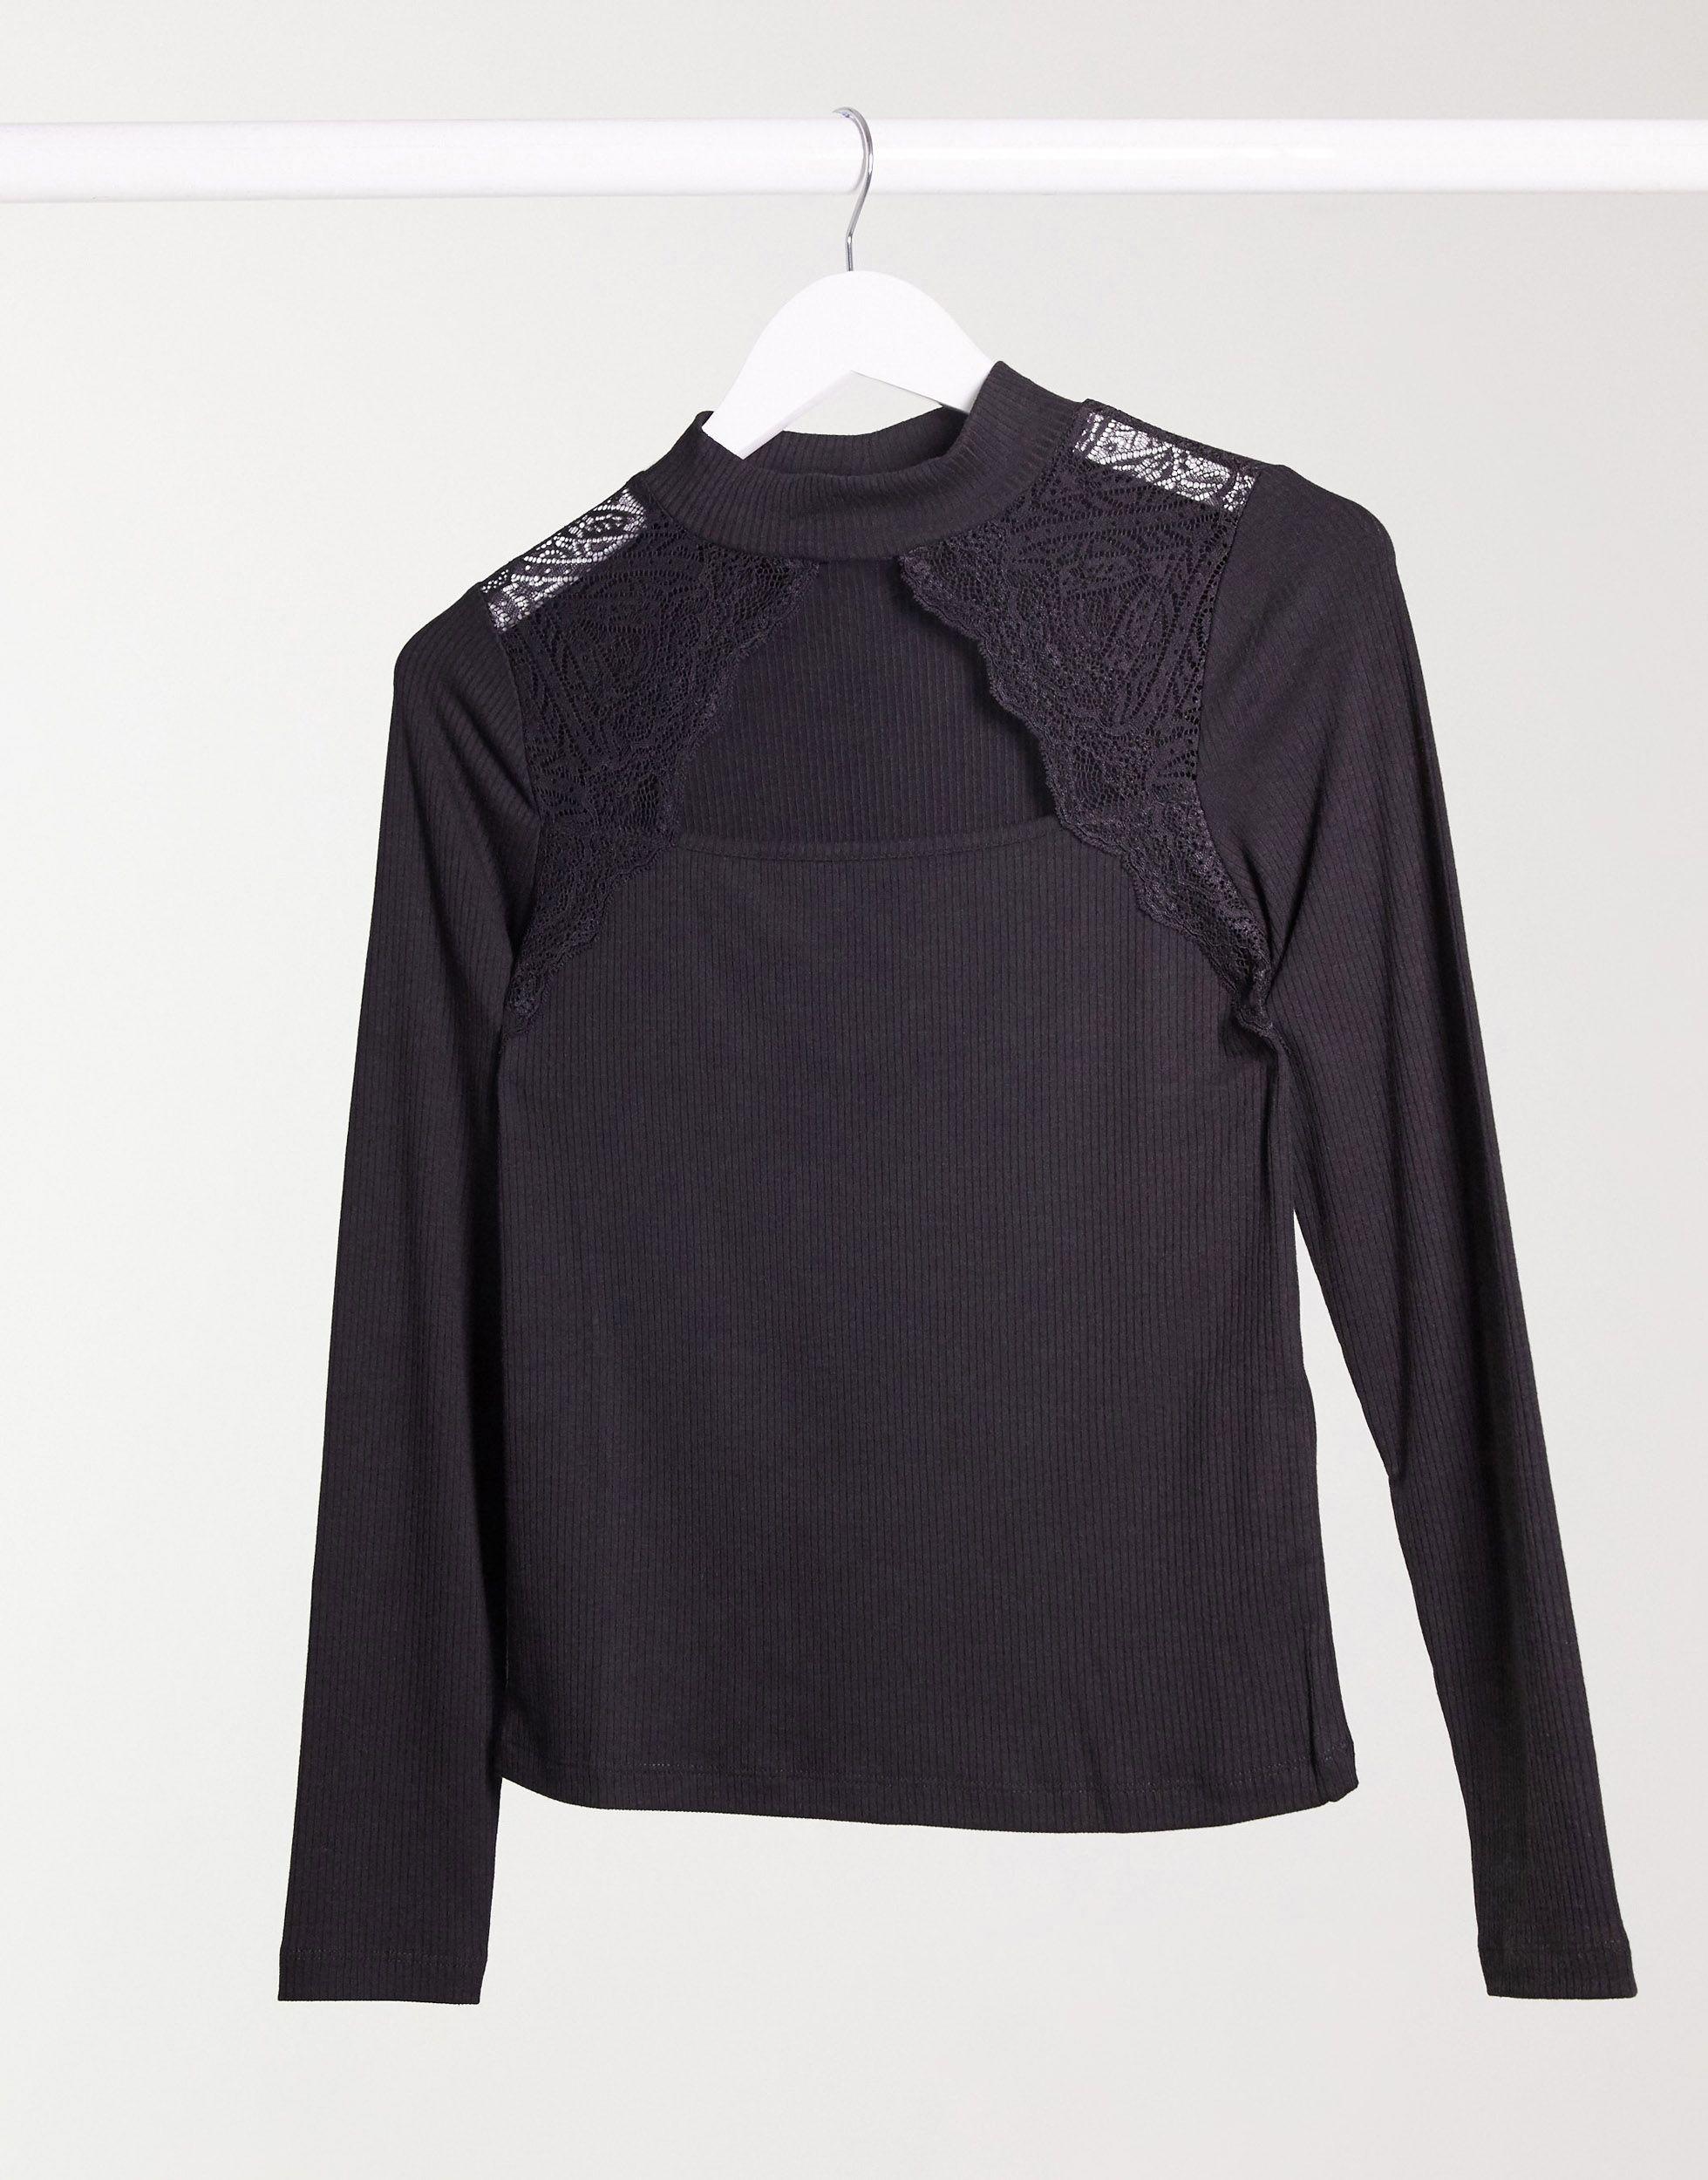 Moda Ribbed Top With Cut Out And High Neck, Plain Pattern in Black - Lyst